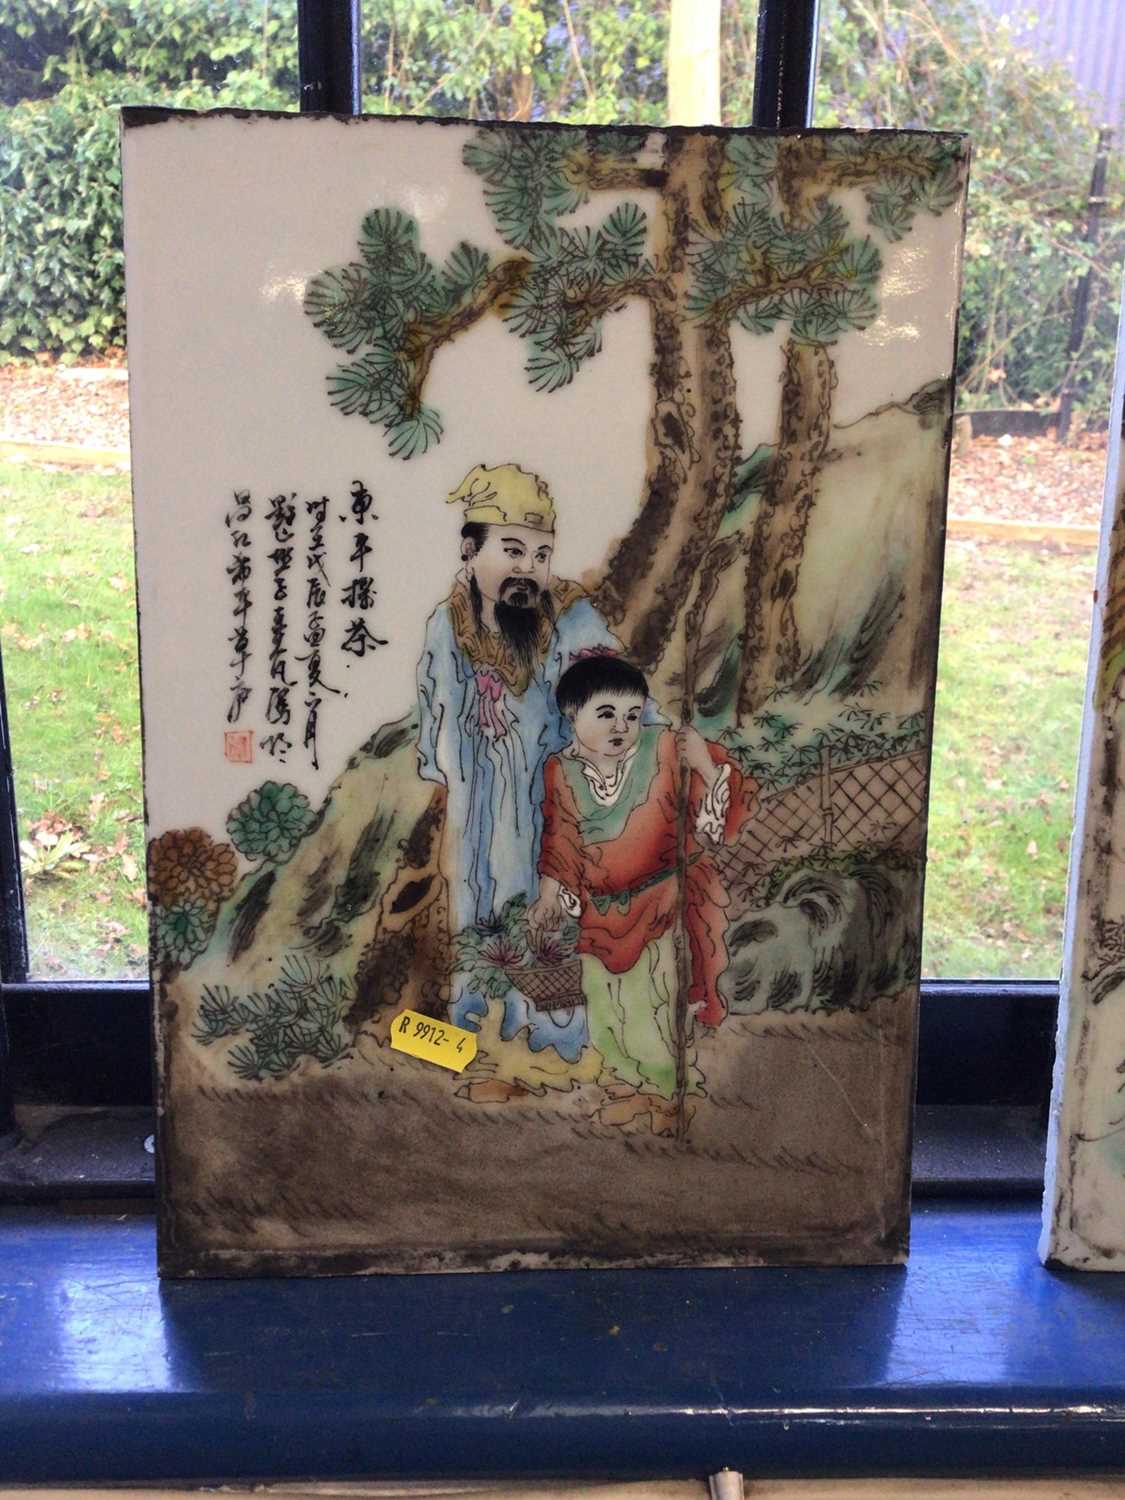 Pair of Chinese porcelain plaques, 20th century, painted with figures and calligraphy - Image 3 of 4